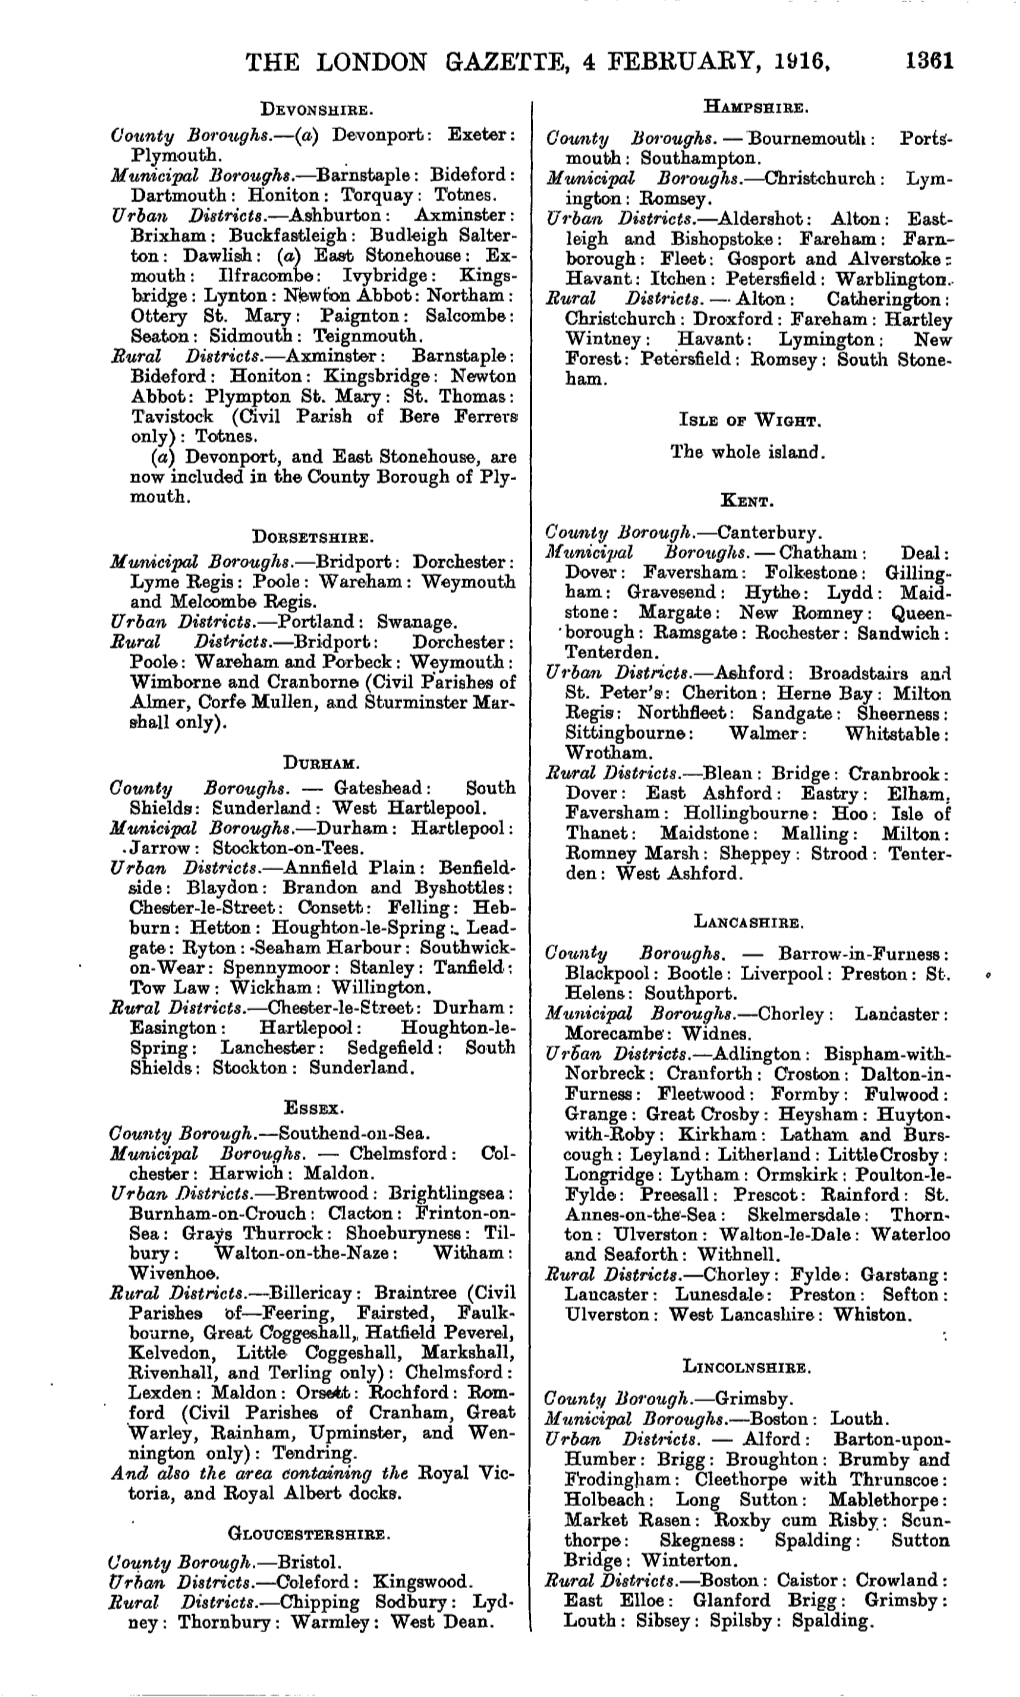 The London Gazette, Issue 29463, Page 1361